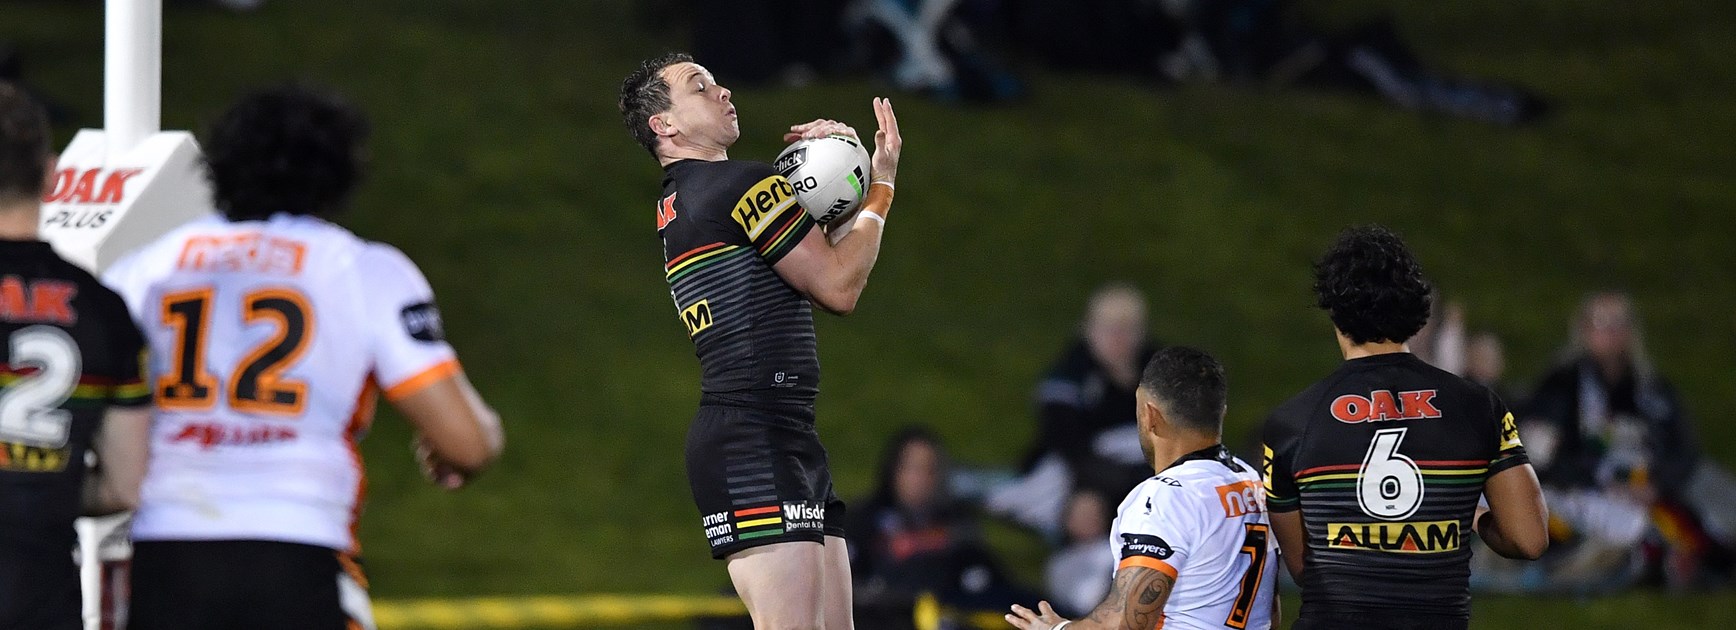 Stat Attack: How Edwards flew into top spot for kick defusals